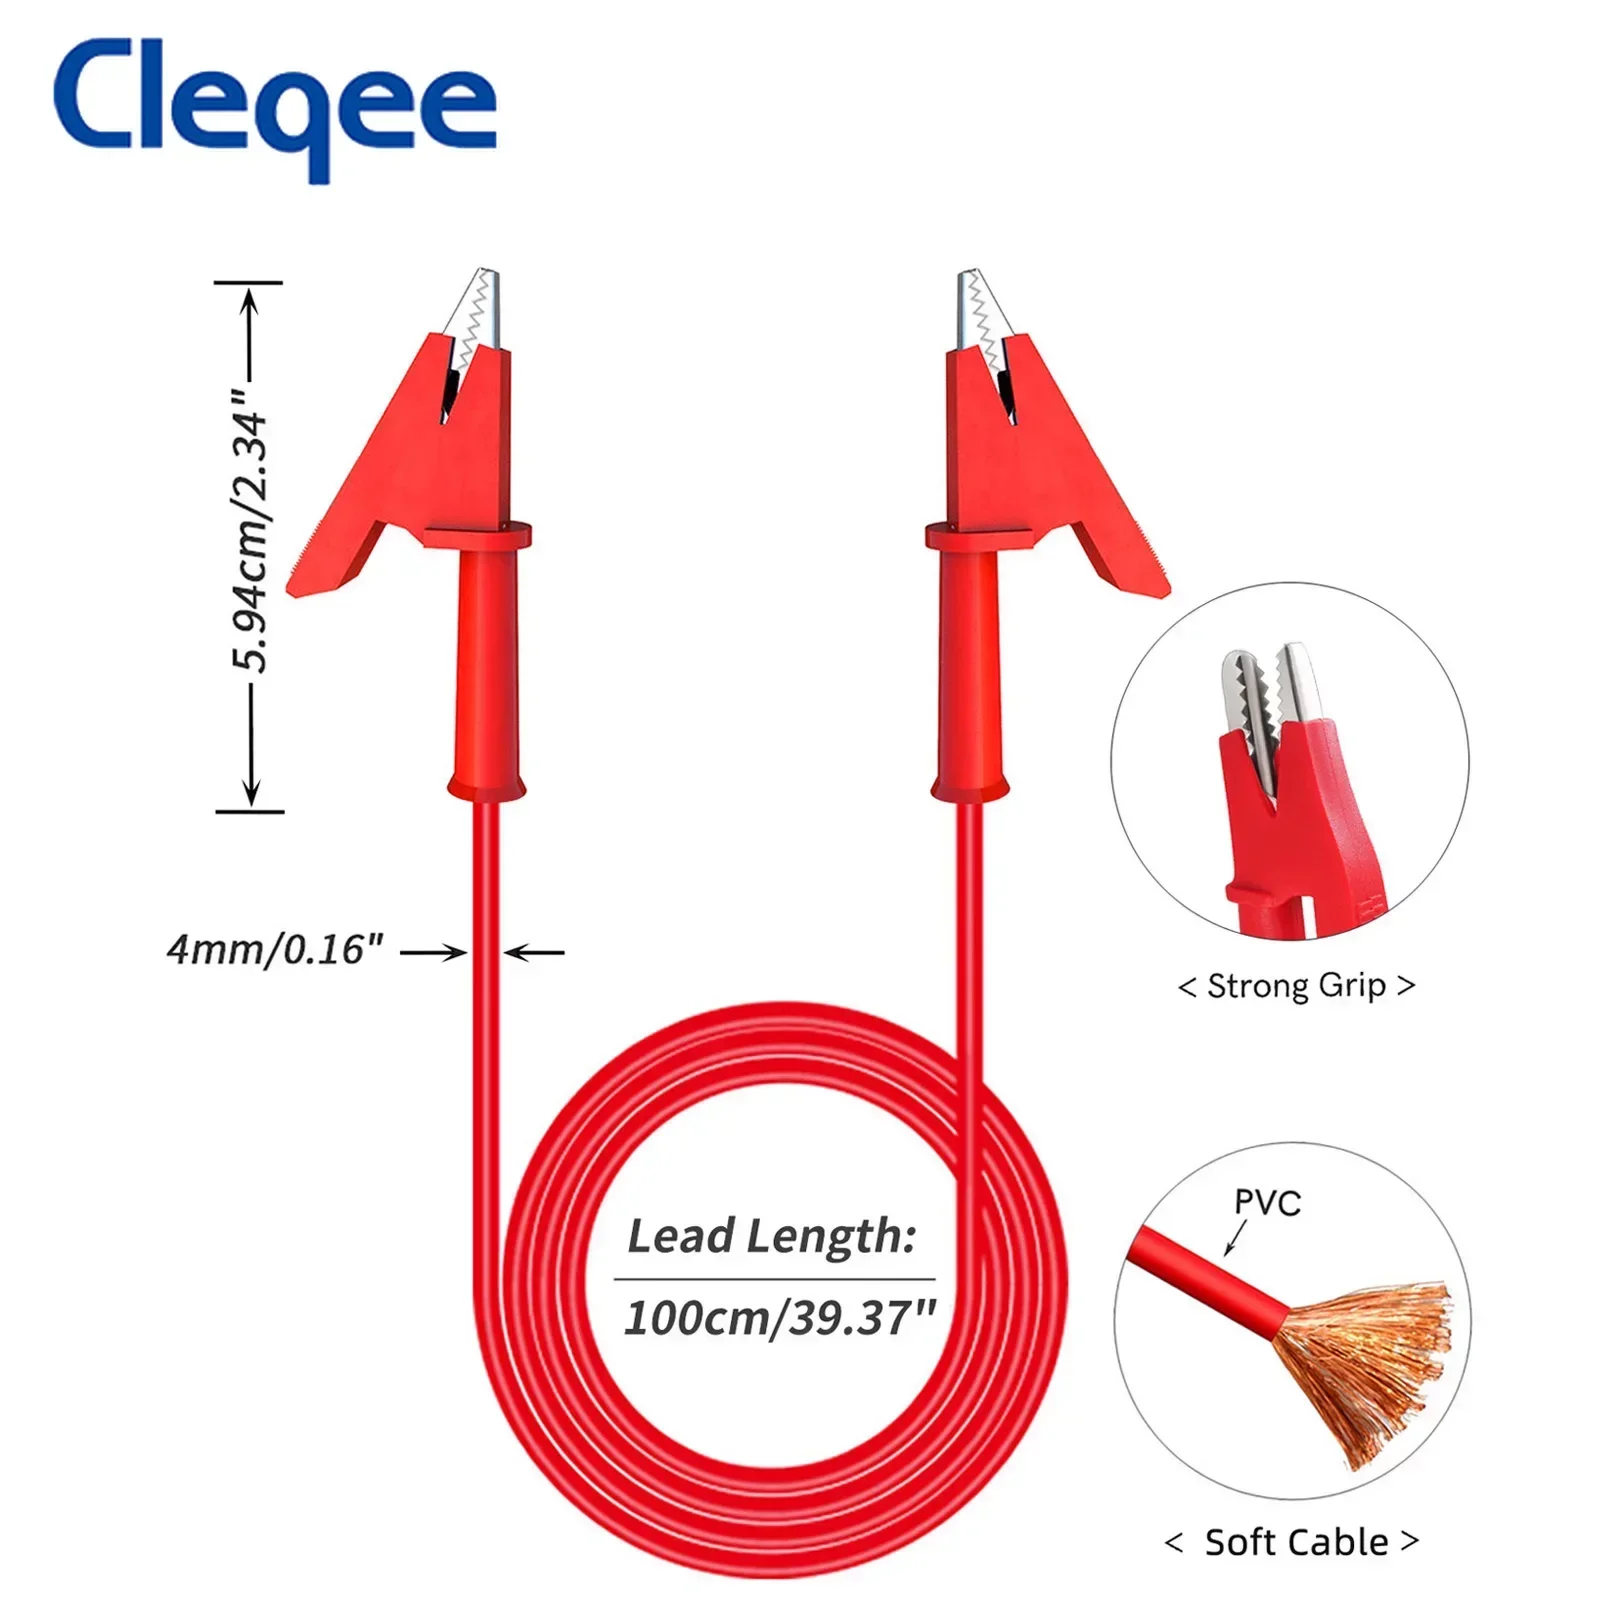 Cleqee P1024 5pcs Dual Alligator Clip Test Lead Crocodile Clamp Cable Wire 1M/2M/3M/5M Multimeter Electronic Testing HAVC Tool